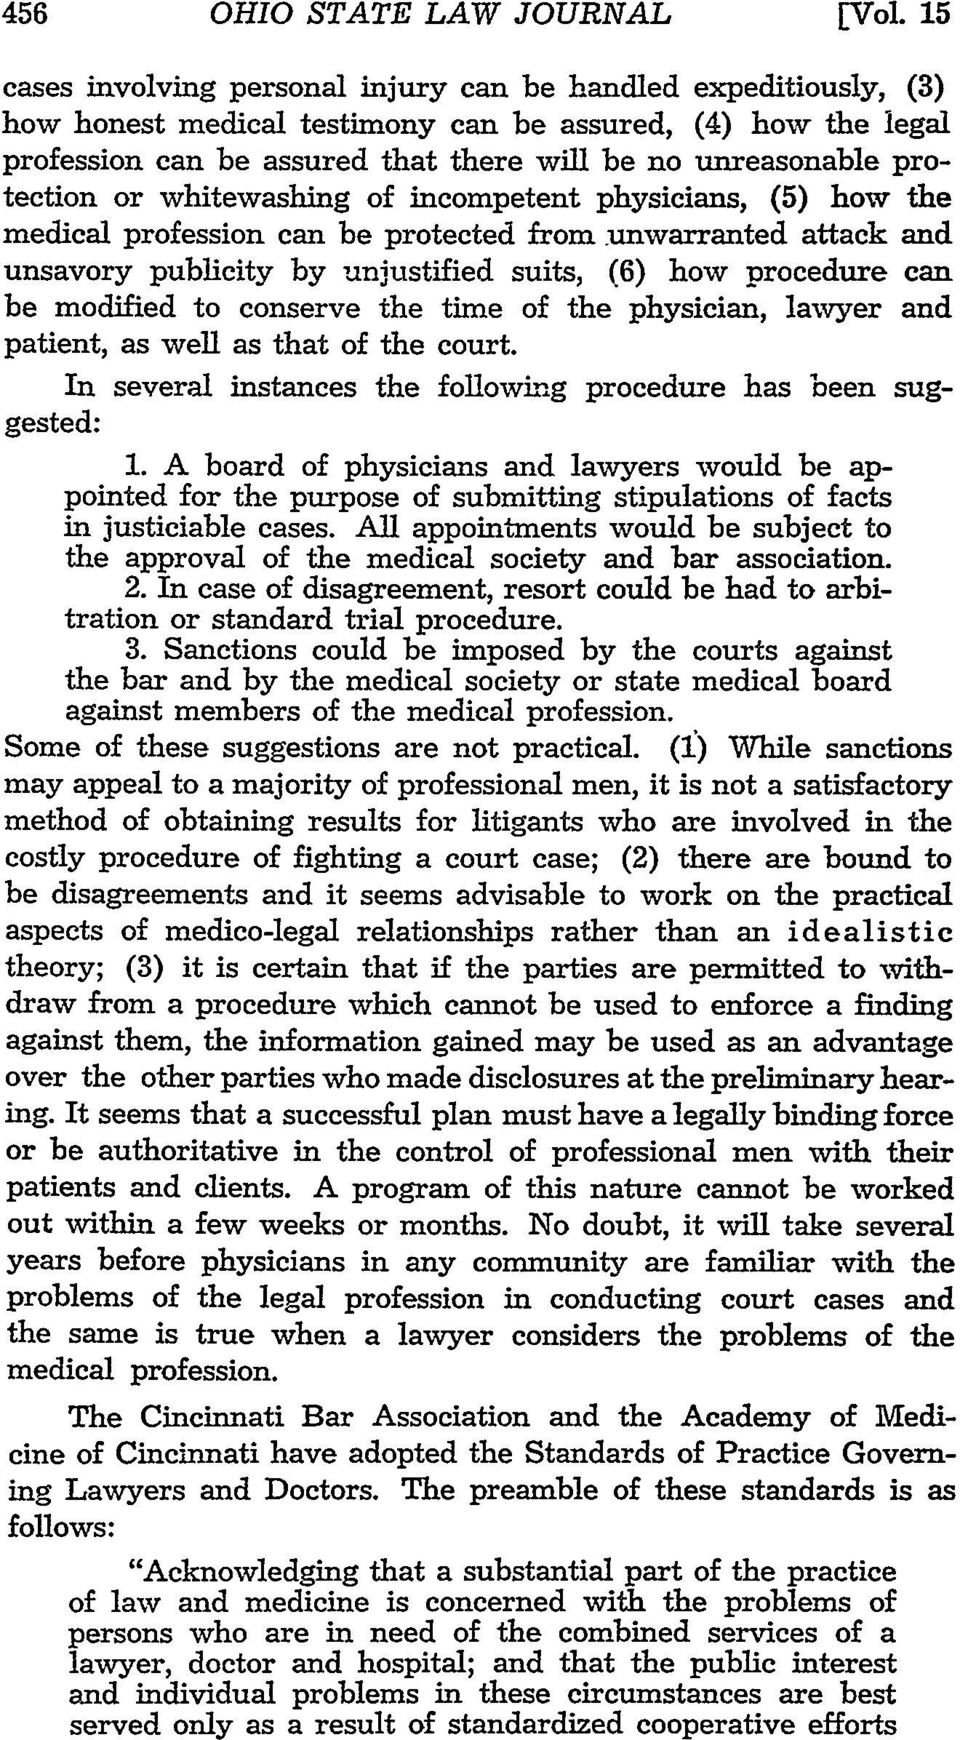 protection or whitewashing of incompetent physicians, (5) how the medical profession can be protected from unwarranted attack and unsavory publicity by unjustified suits, (6) how procedure can be